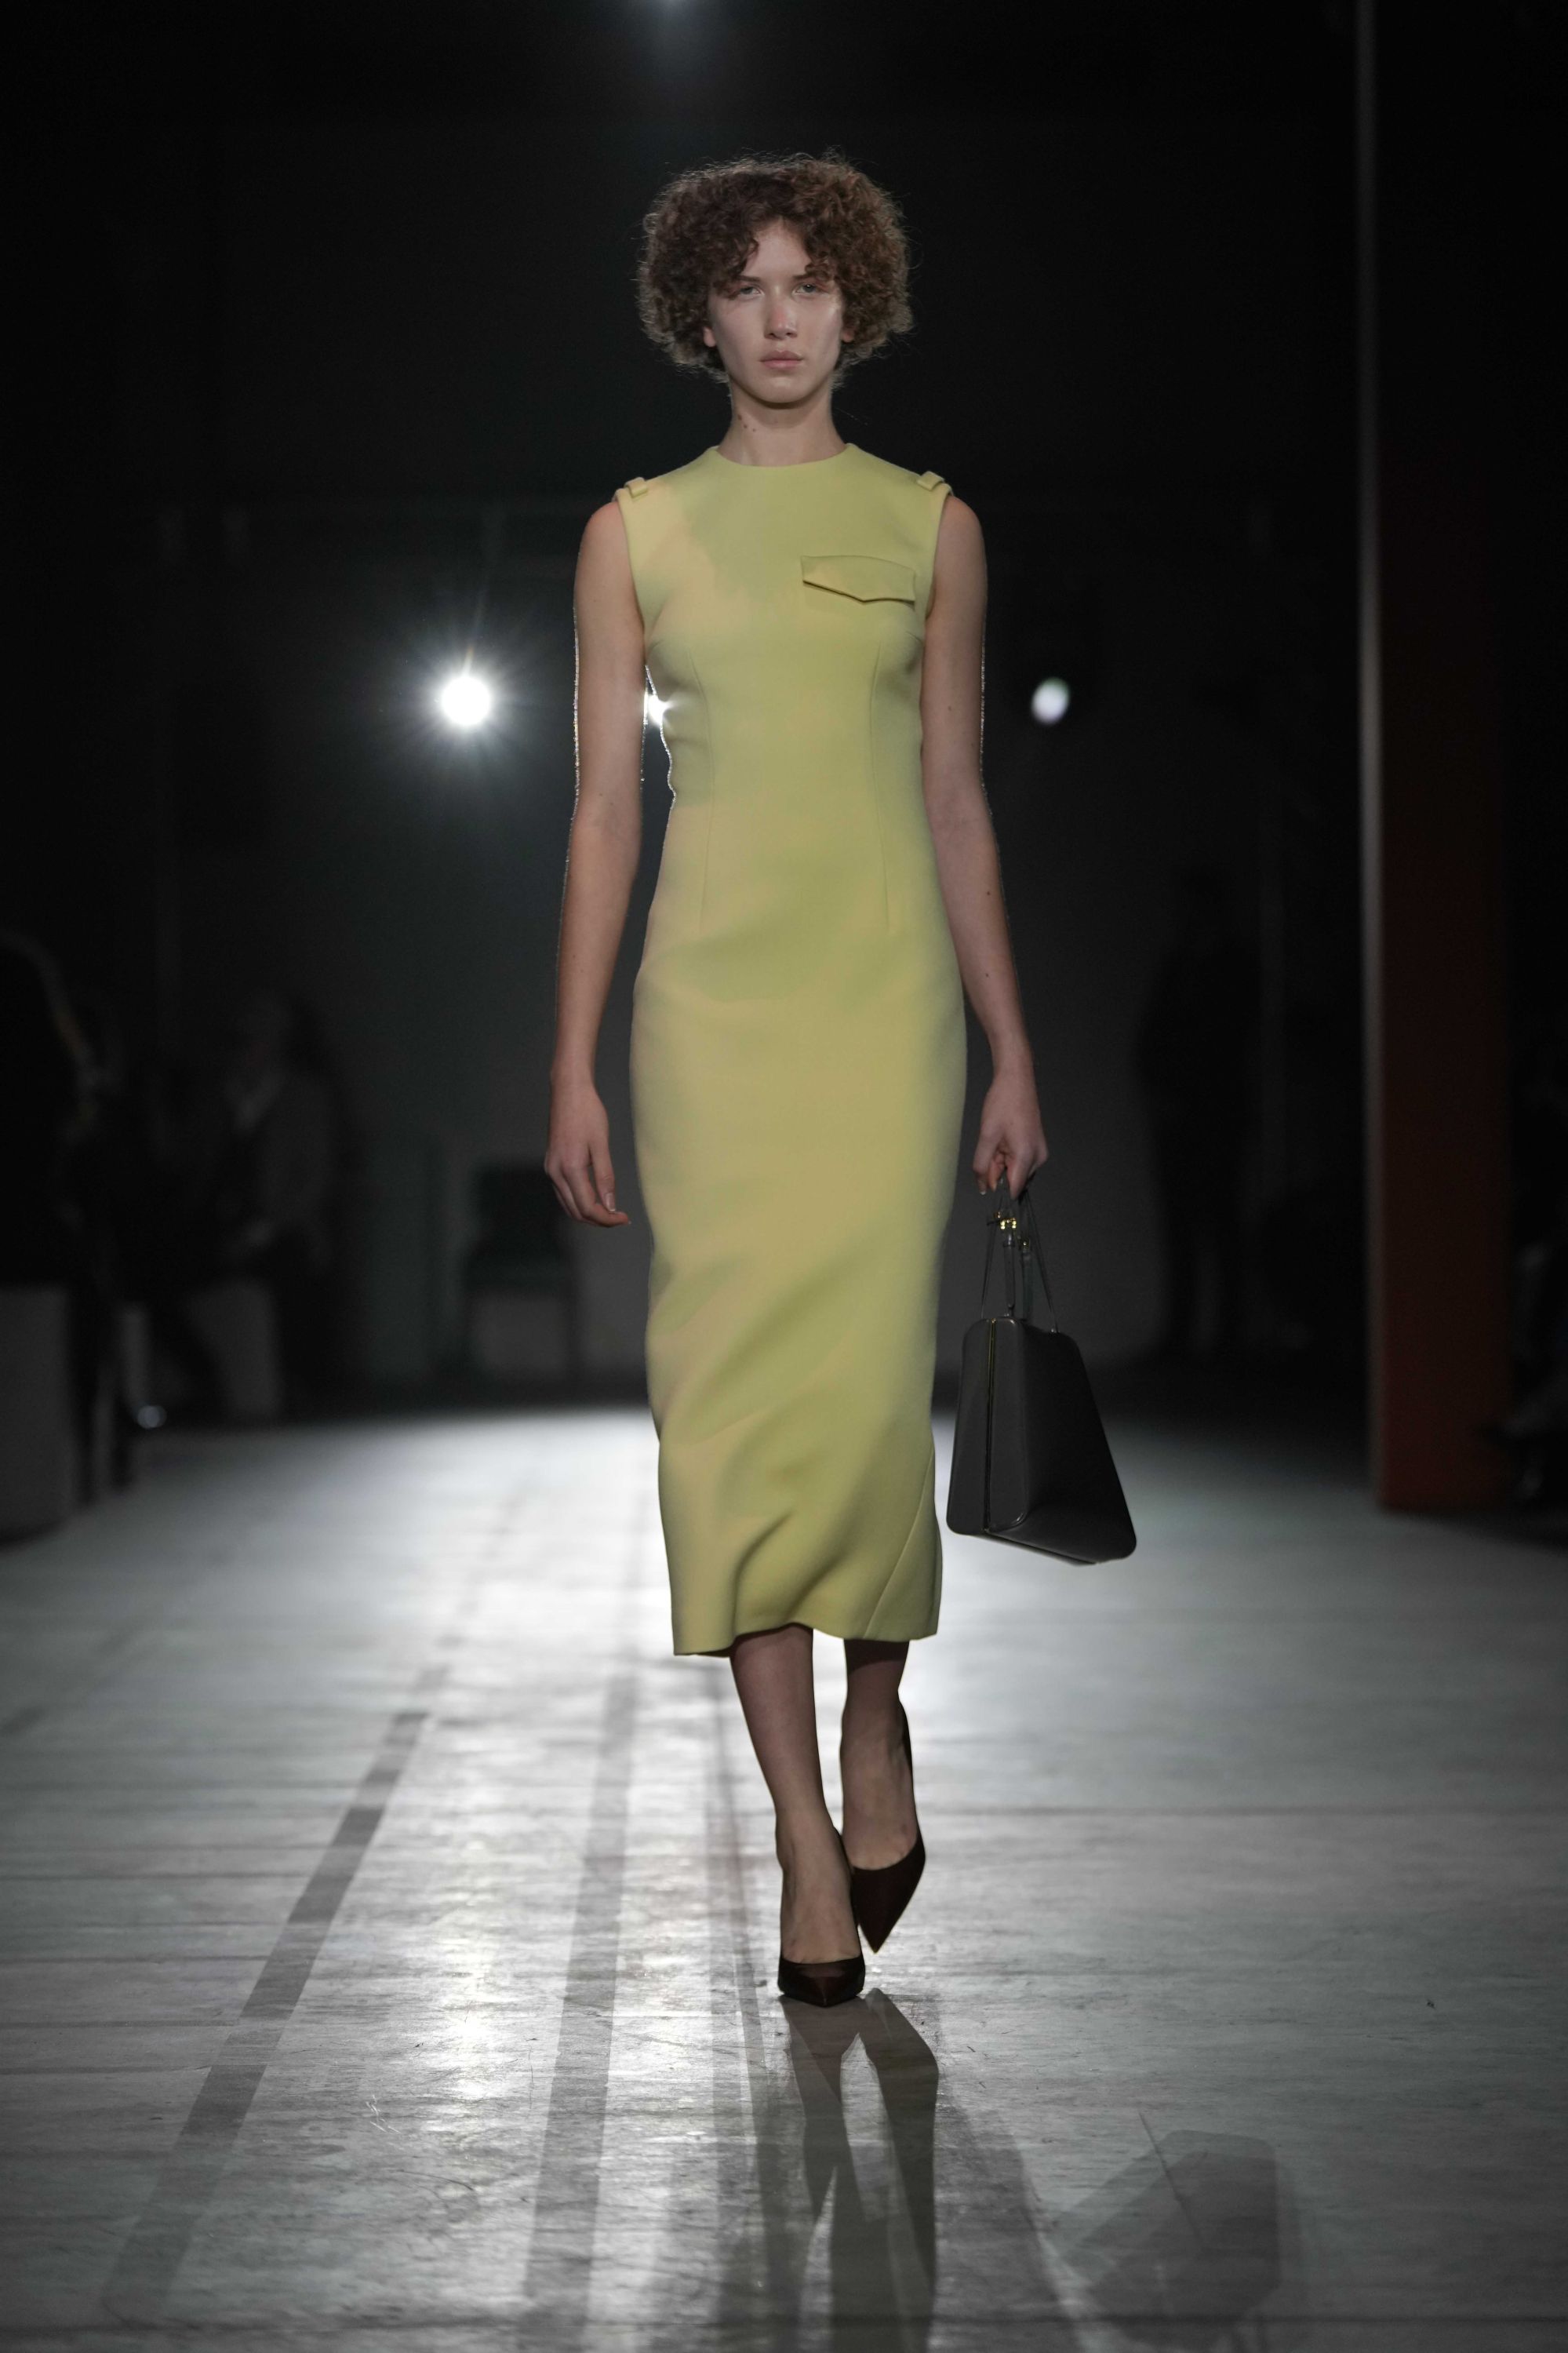 Milan Fashion Week 2023: Prada brought florals and utilitarian flair and  put Kendall Jenner on the runway, while 'King Giorgio' ushered in a new era  of velvet and colour at Emporio Armani